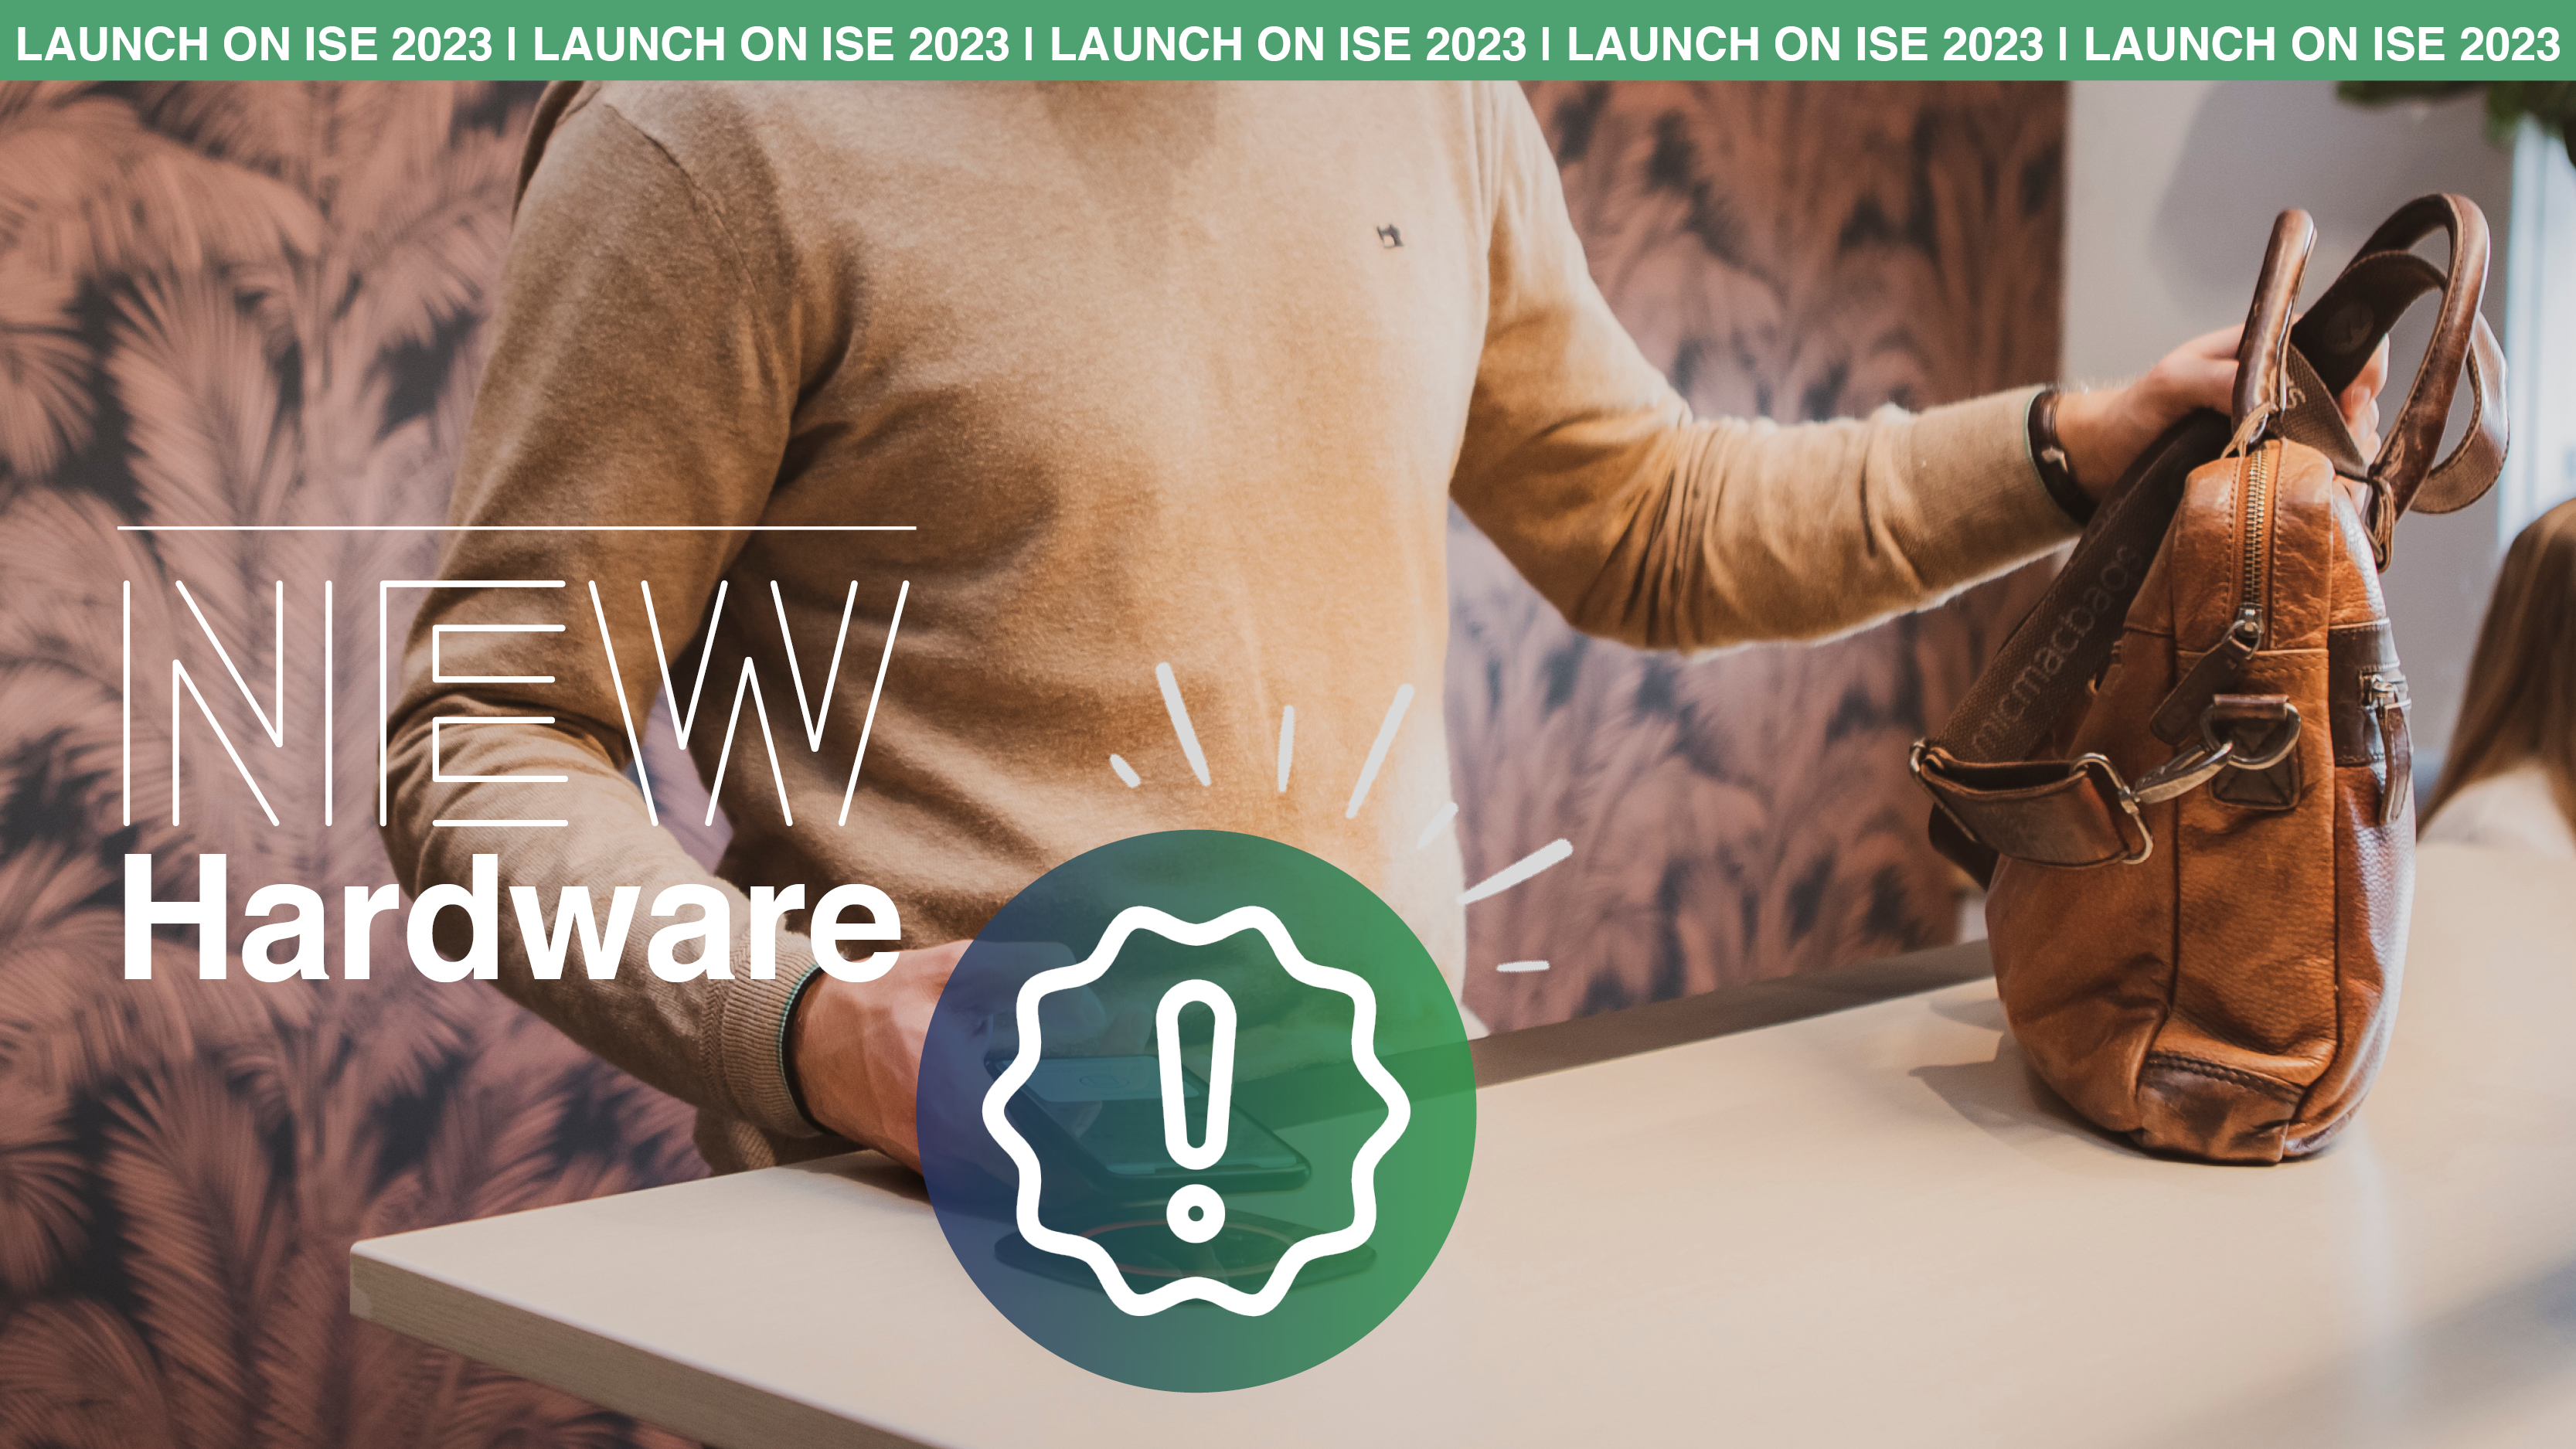 GoBright - NEW hardware launch - ISE 2023